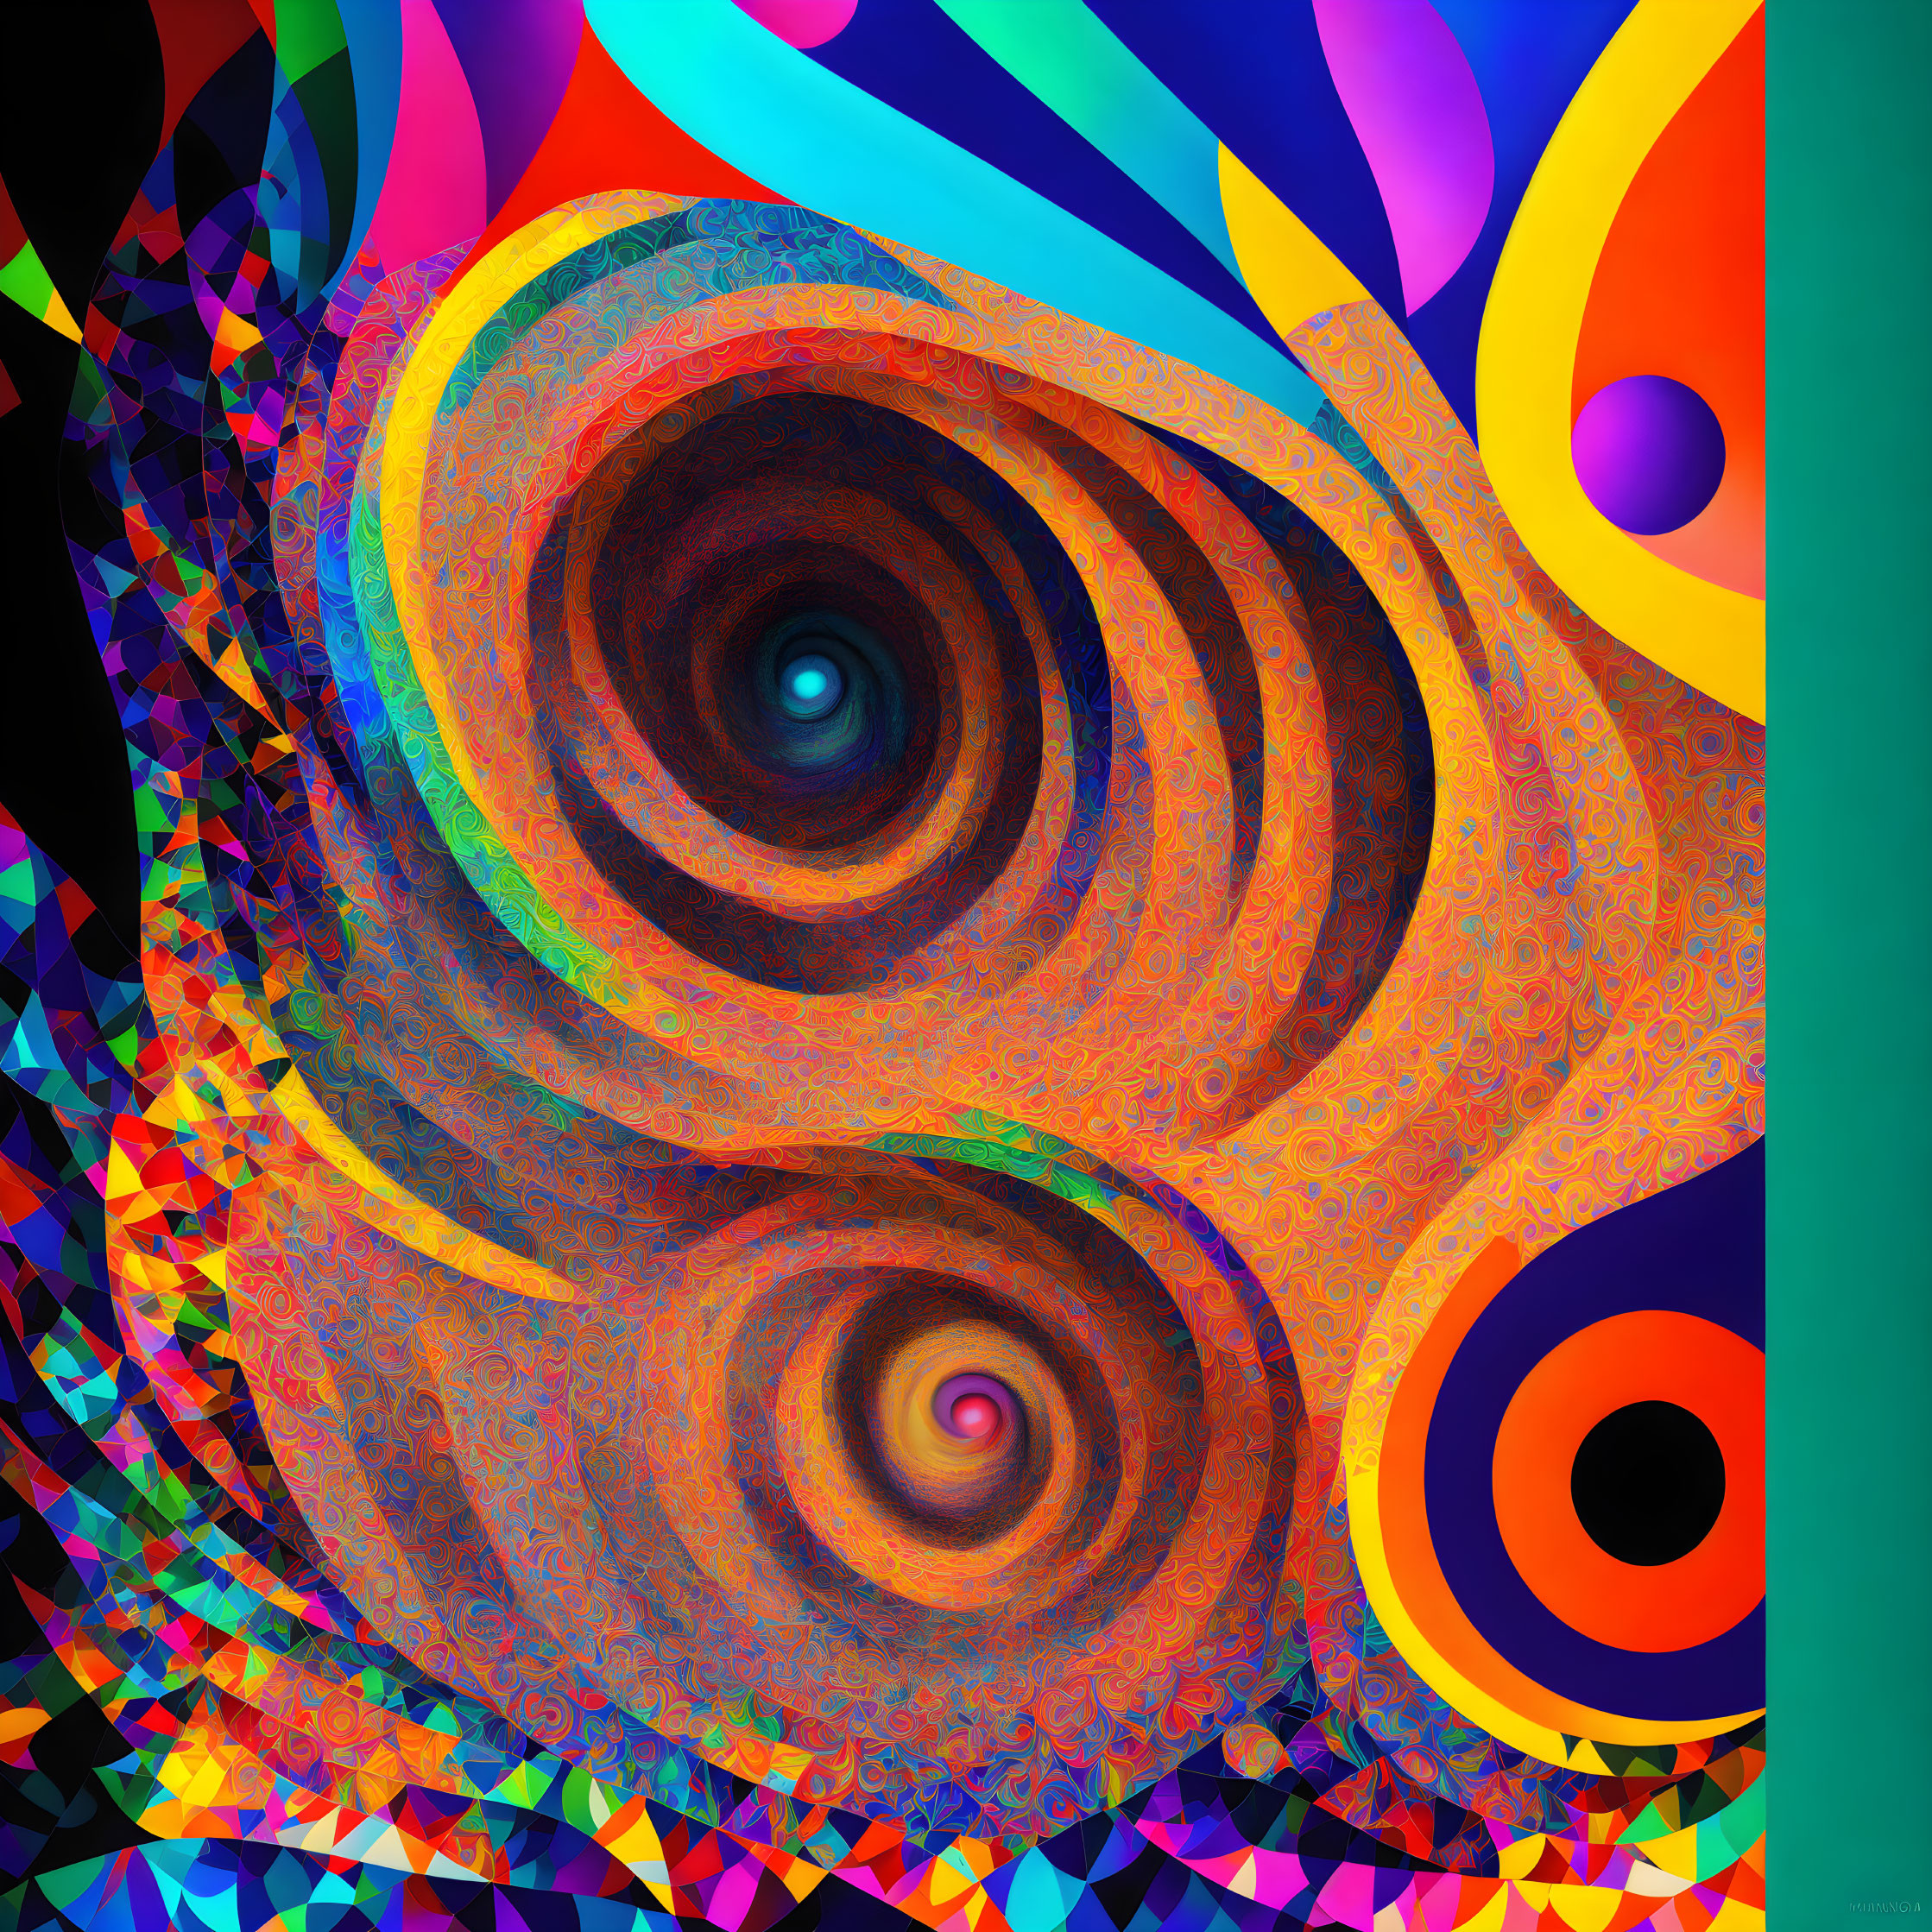 Colorful Swirling Abstract Digital Art with Depth and Movement